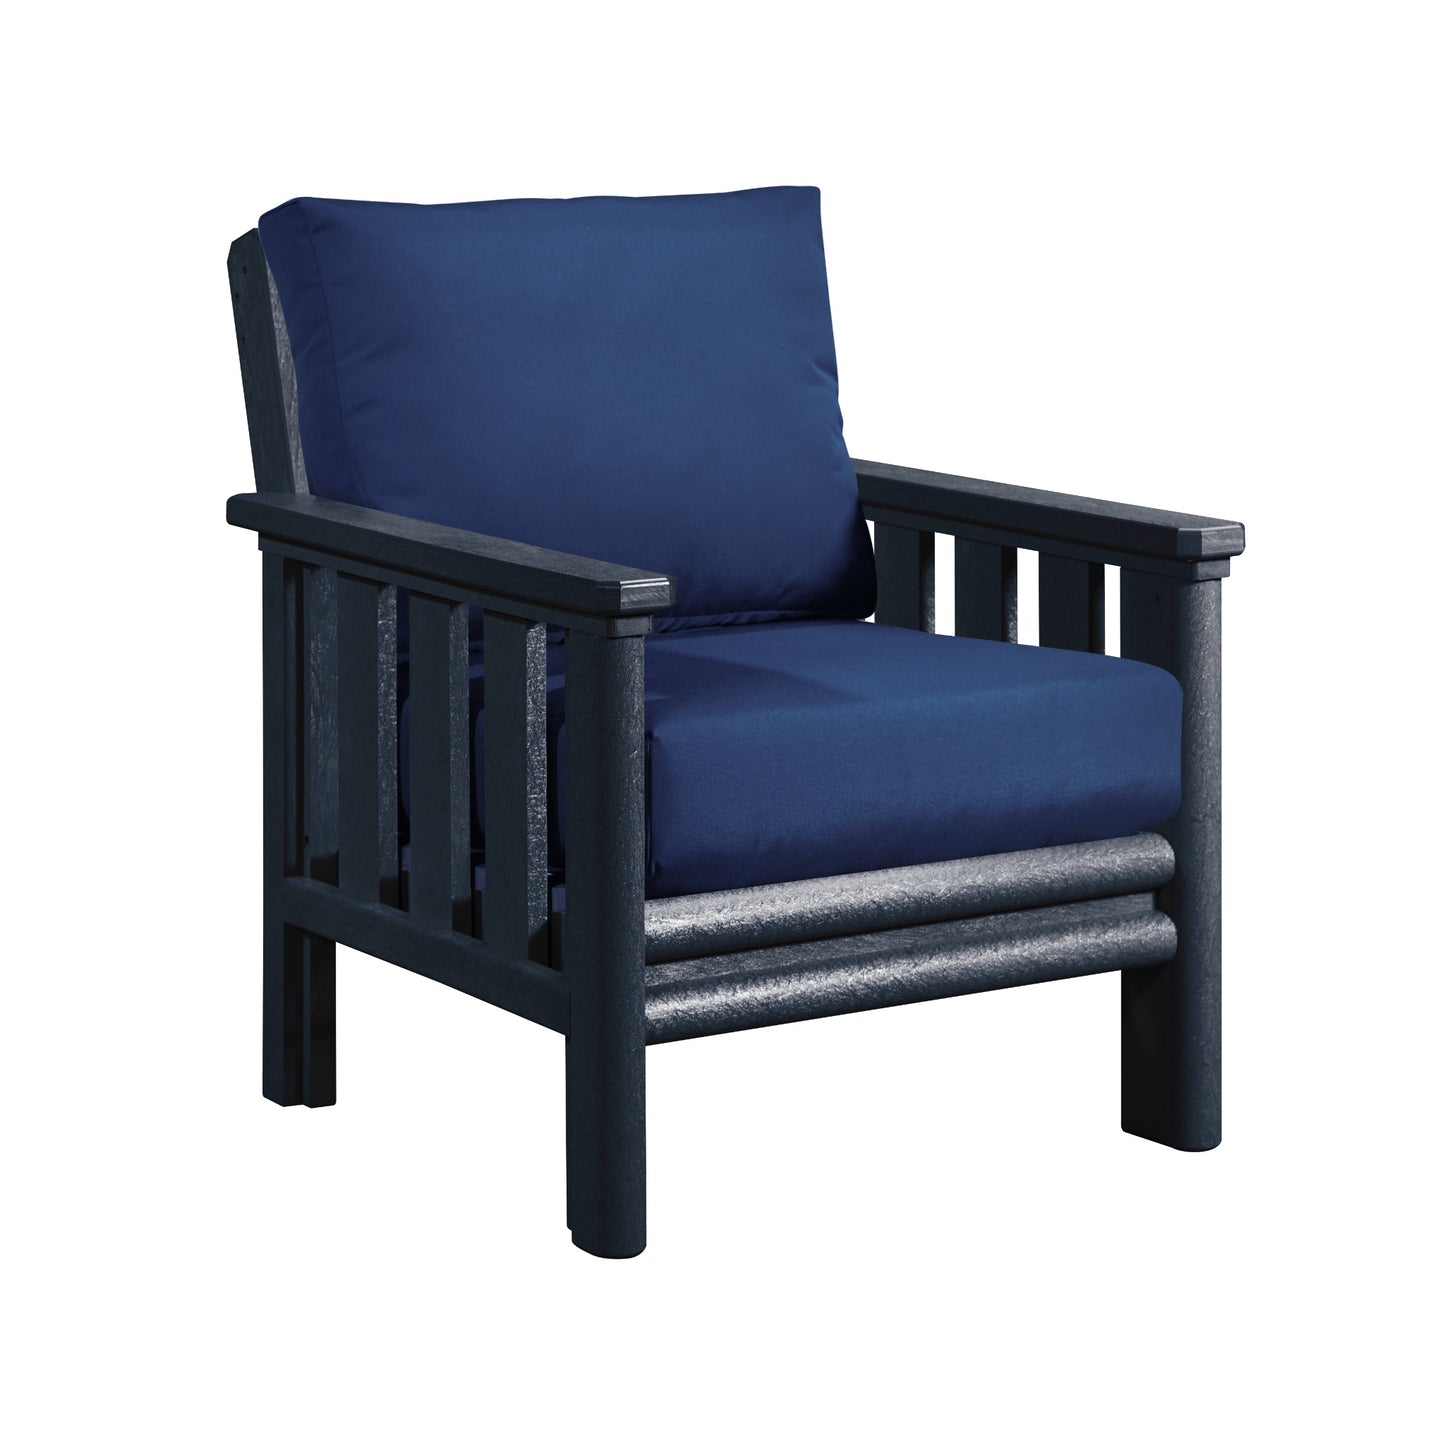 Stratford Arm Chair - BLACK FRAME WITH CUSHIONS - DSF261-14 [DSF141]